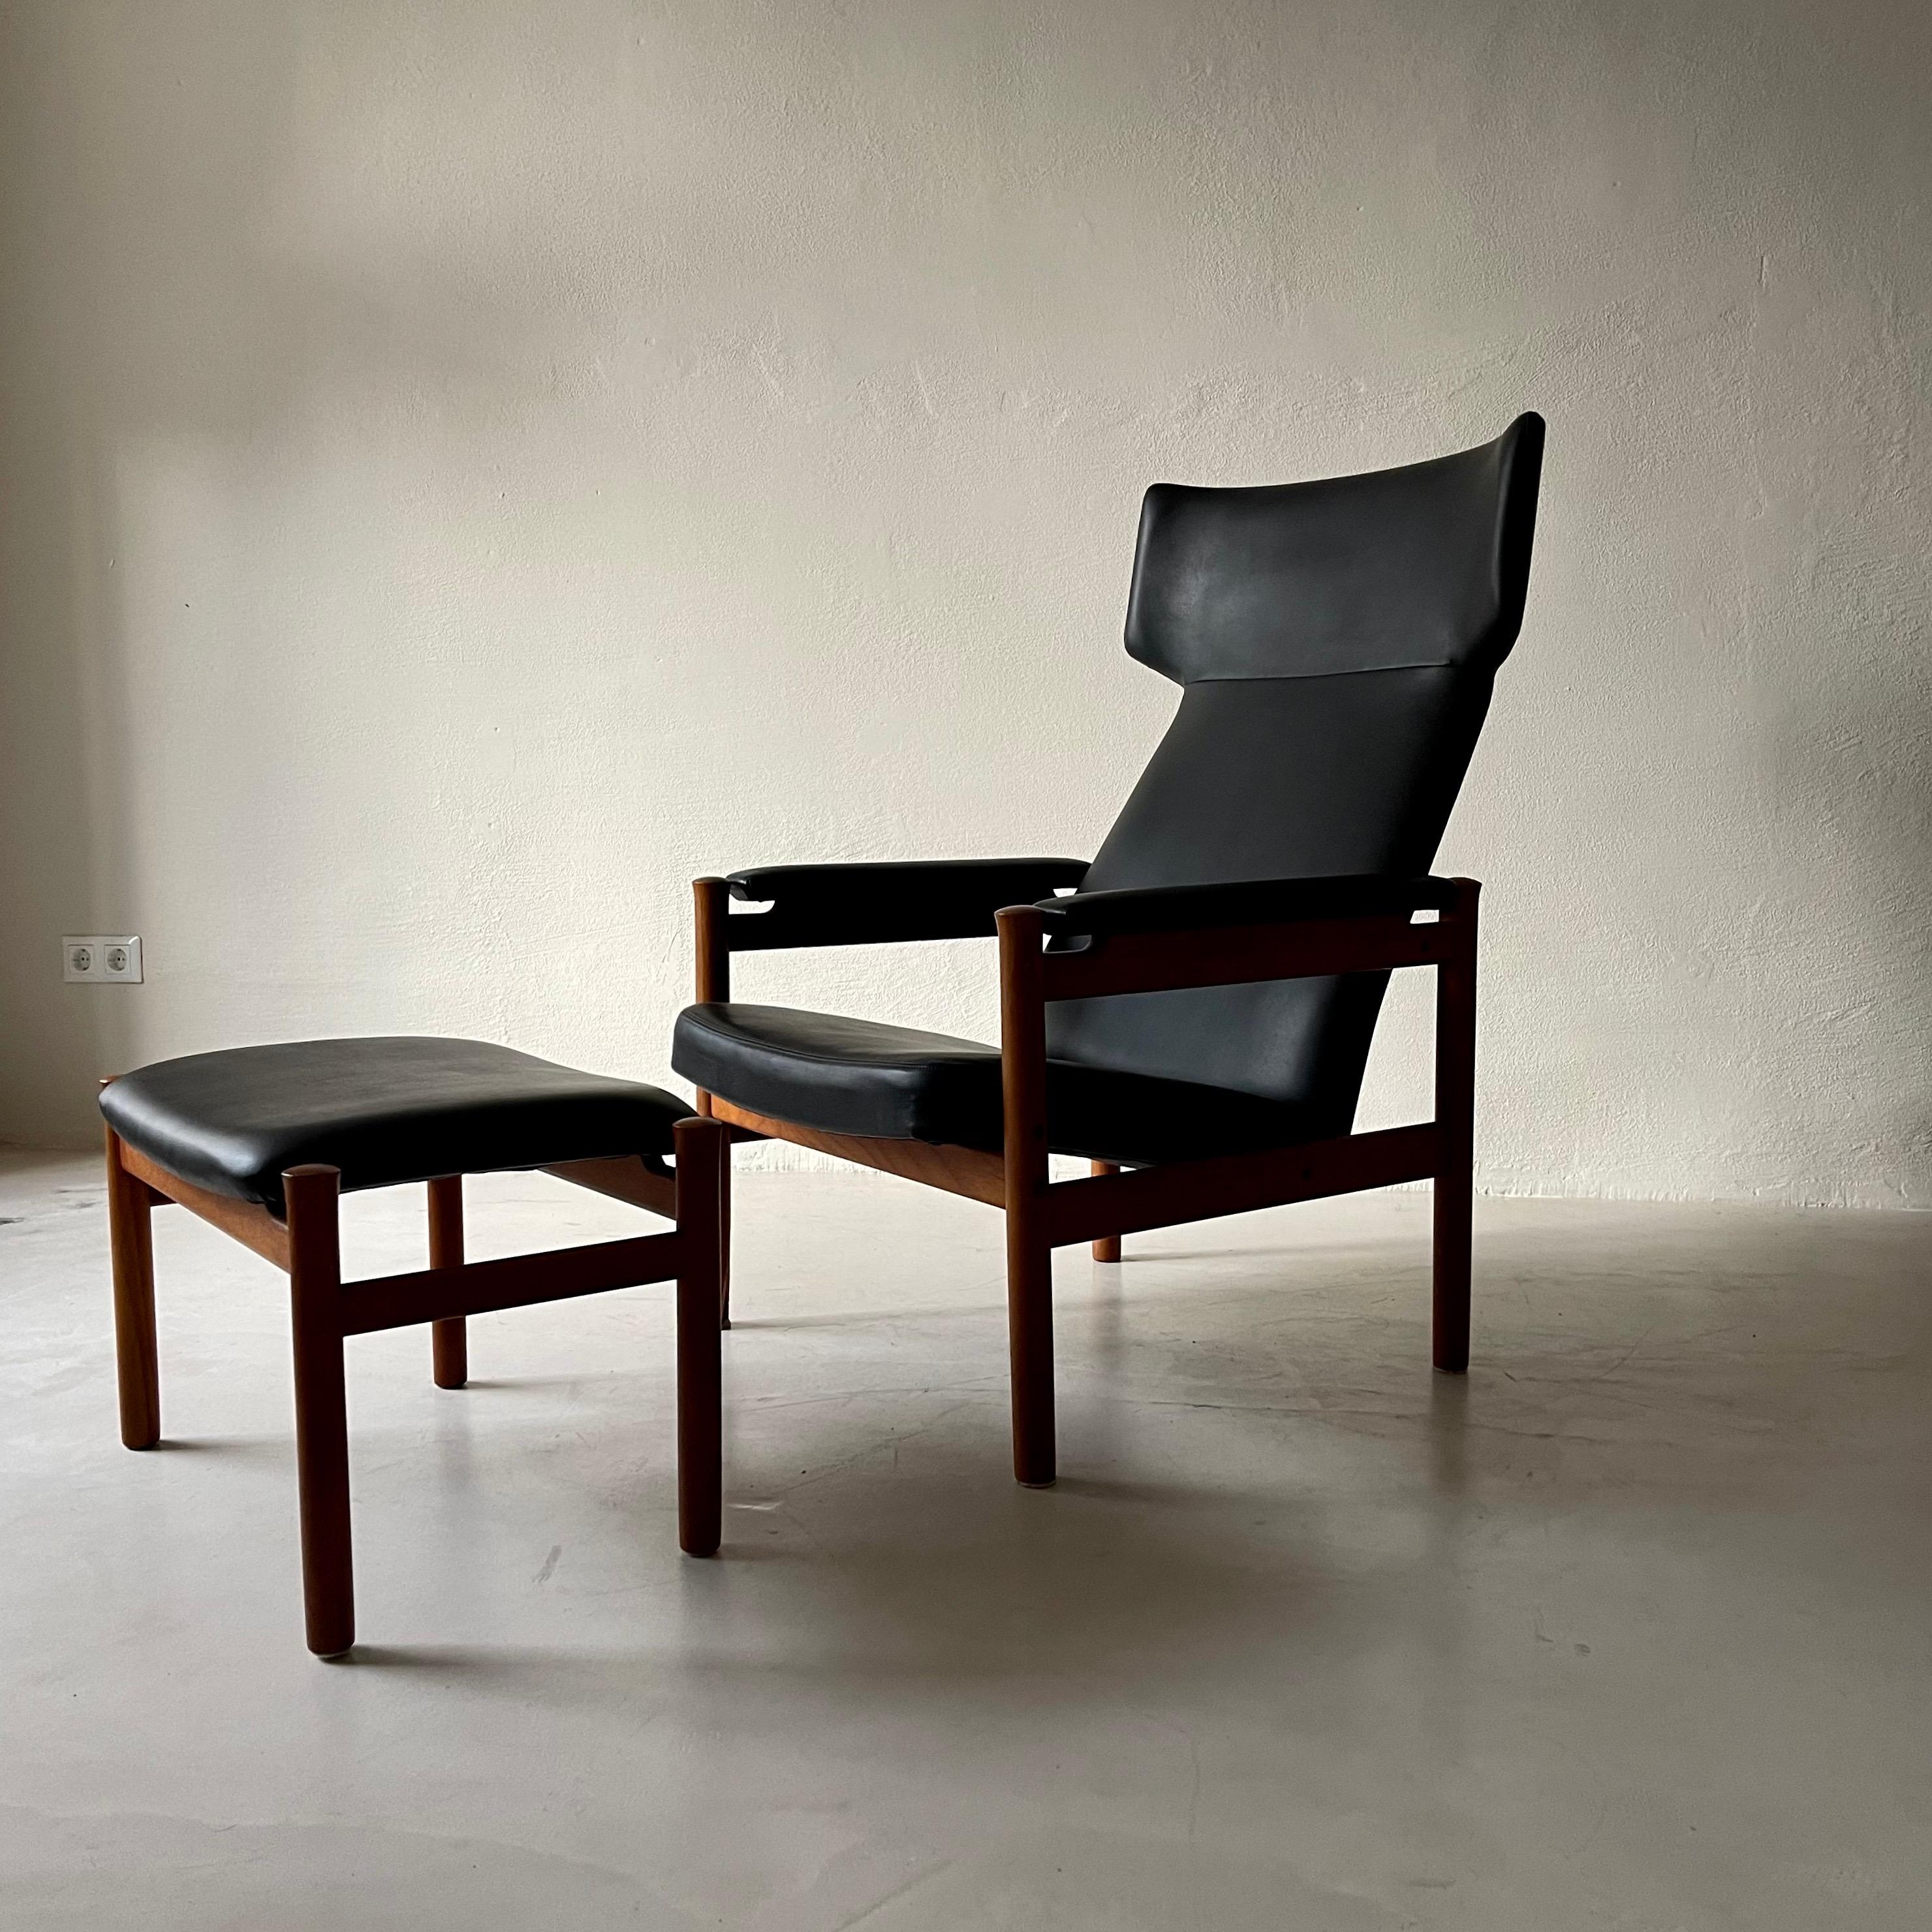 Rare wingback easy chair model and matching ottoman 4365 designed by Søren Hansen. A truly rare find with the ottoman and in very fine vintage condition. Produced by Fritz Hansen in Denmark.